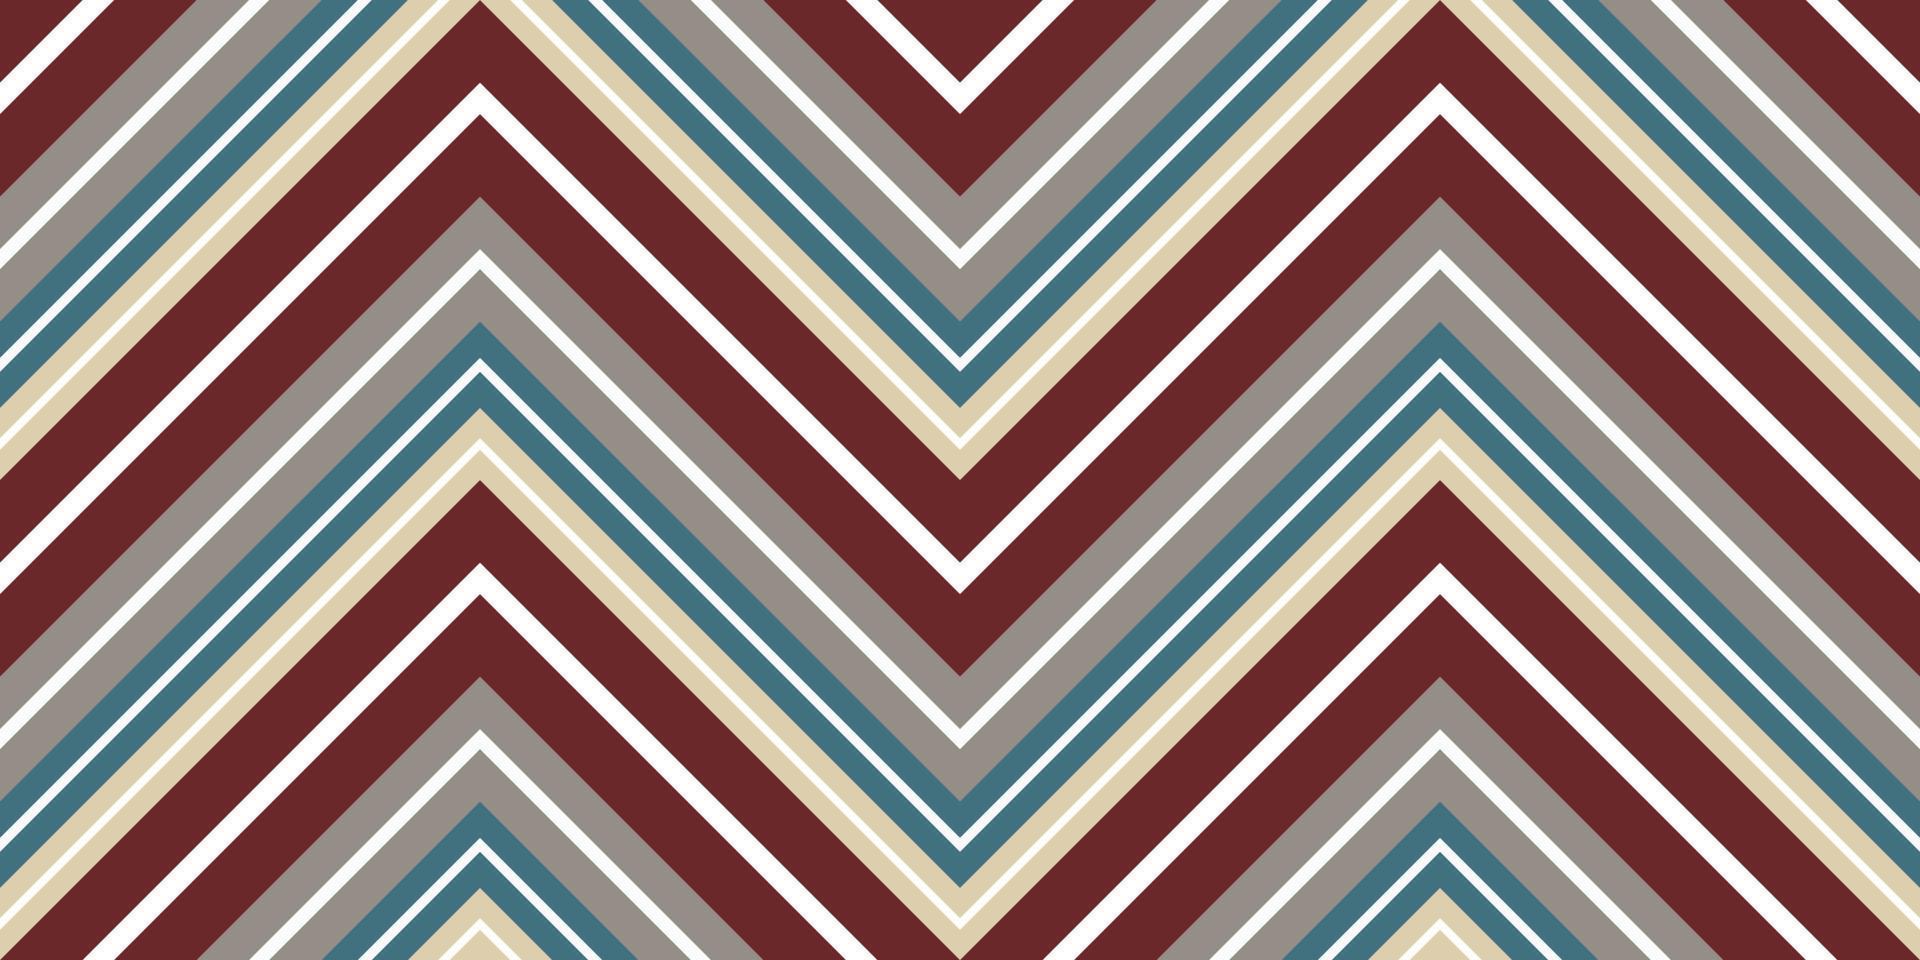 Seamless Chevron pattern geometric background for wallpaper, gift paper, fabric print, furniture. Zigzag print. Unusual painted ornament from brush strokes. vector